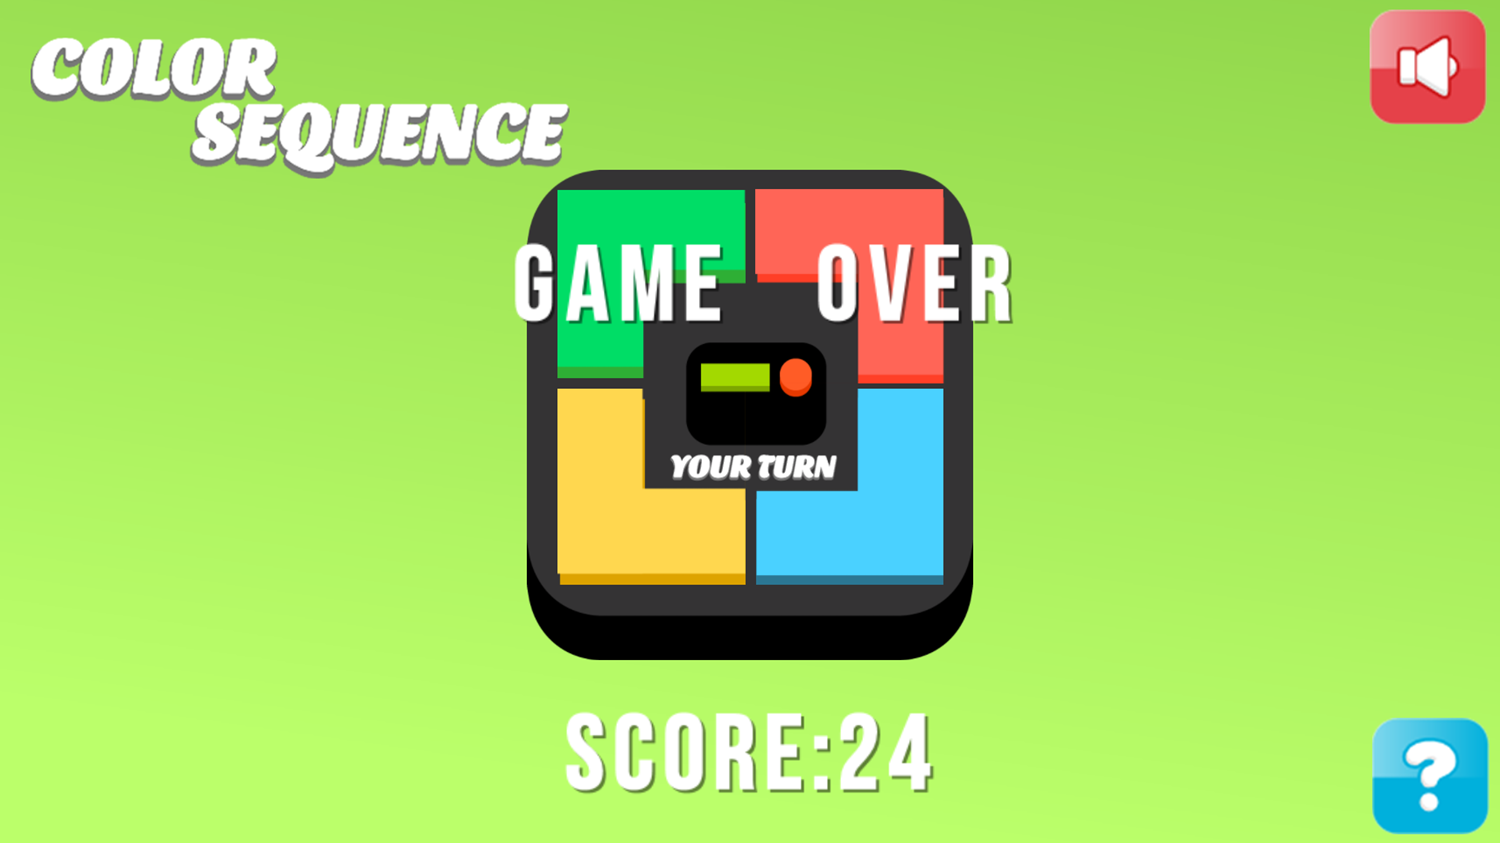 Color Sequence Game Over Screenshot.